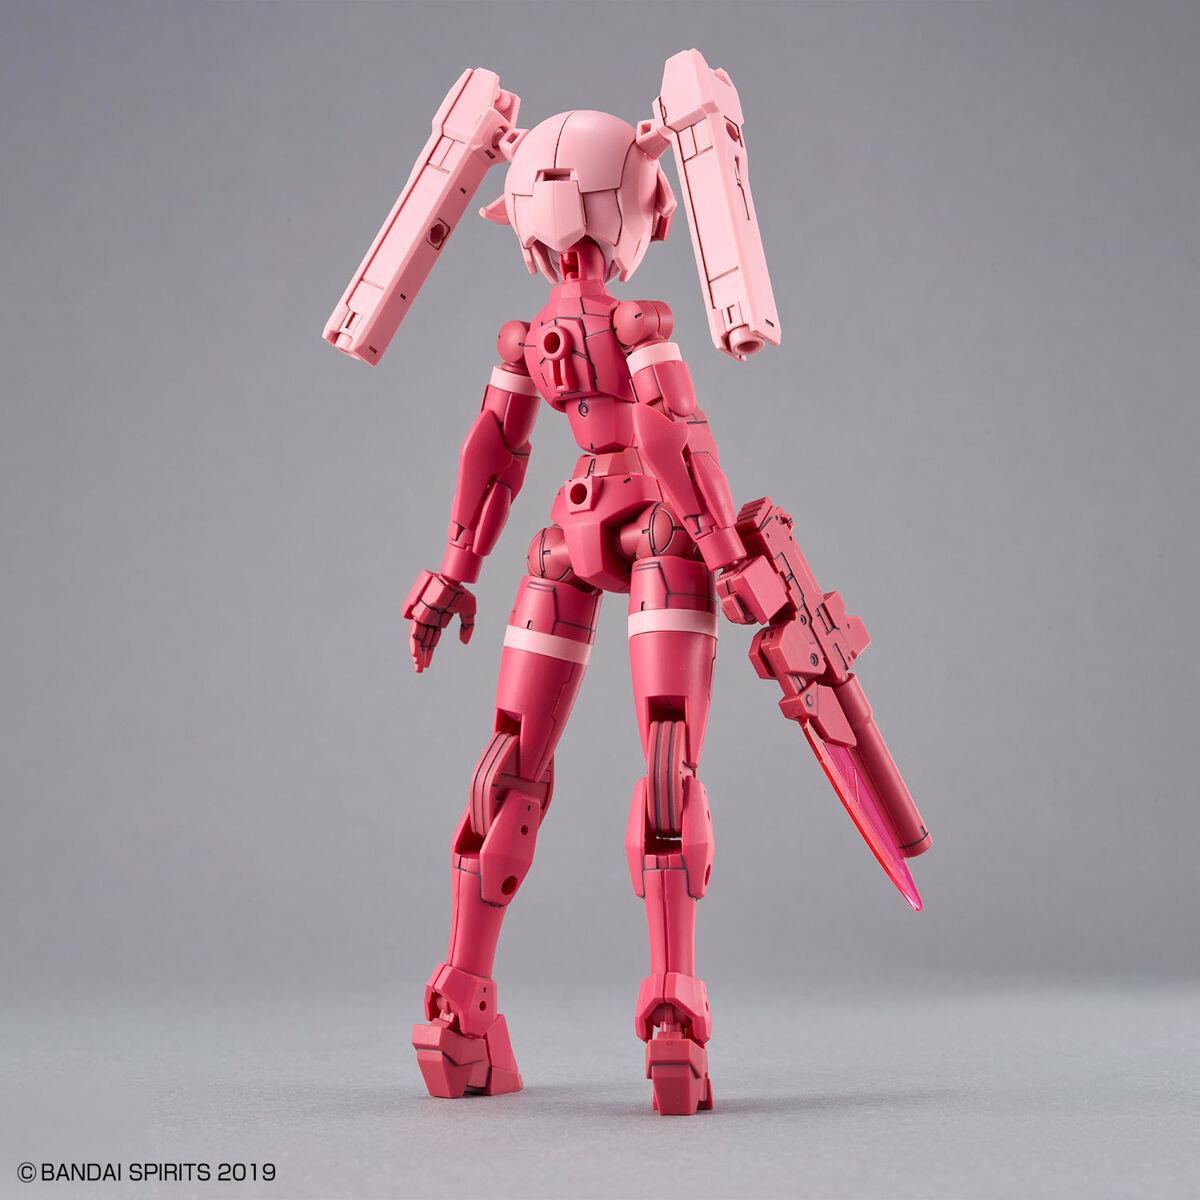 30 Minutes Missions: Acerby [Type-A] 1/144 Model